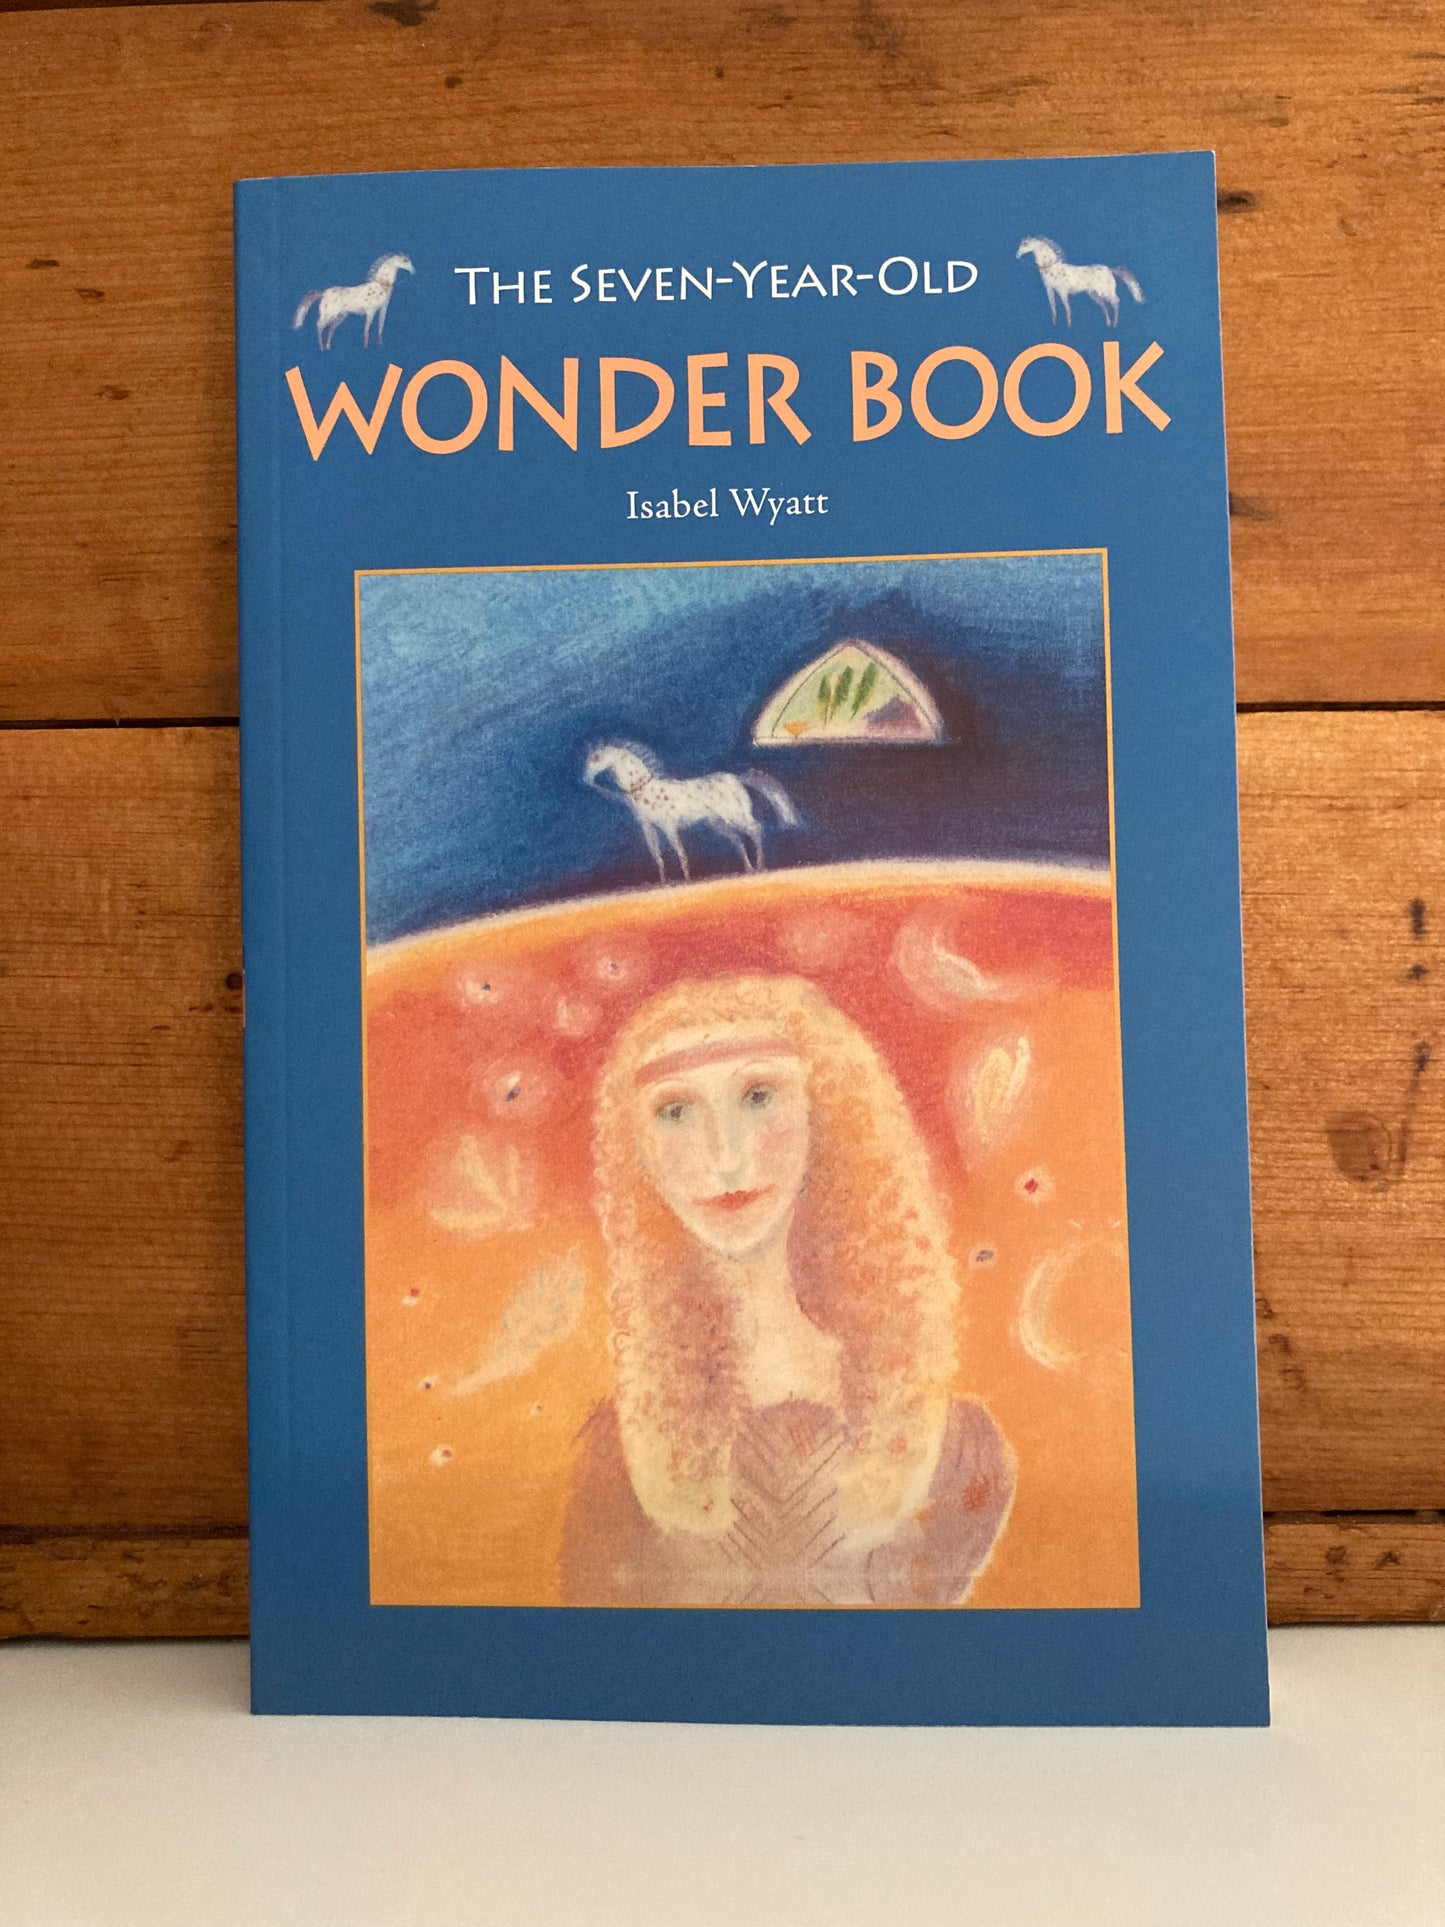 Chapter Book for Young Readers - THE SEVEN-YEAR-OLD WONDER BOOK